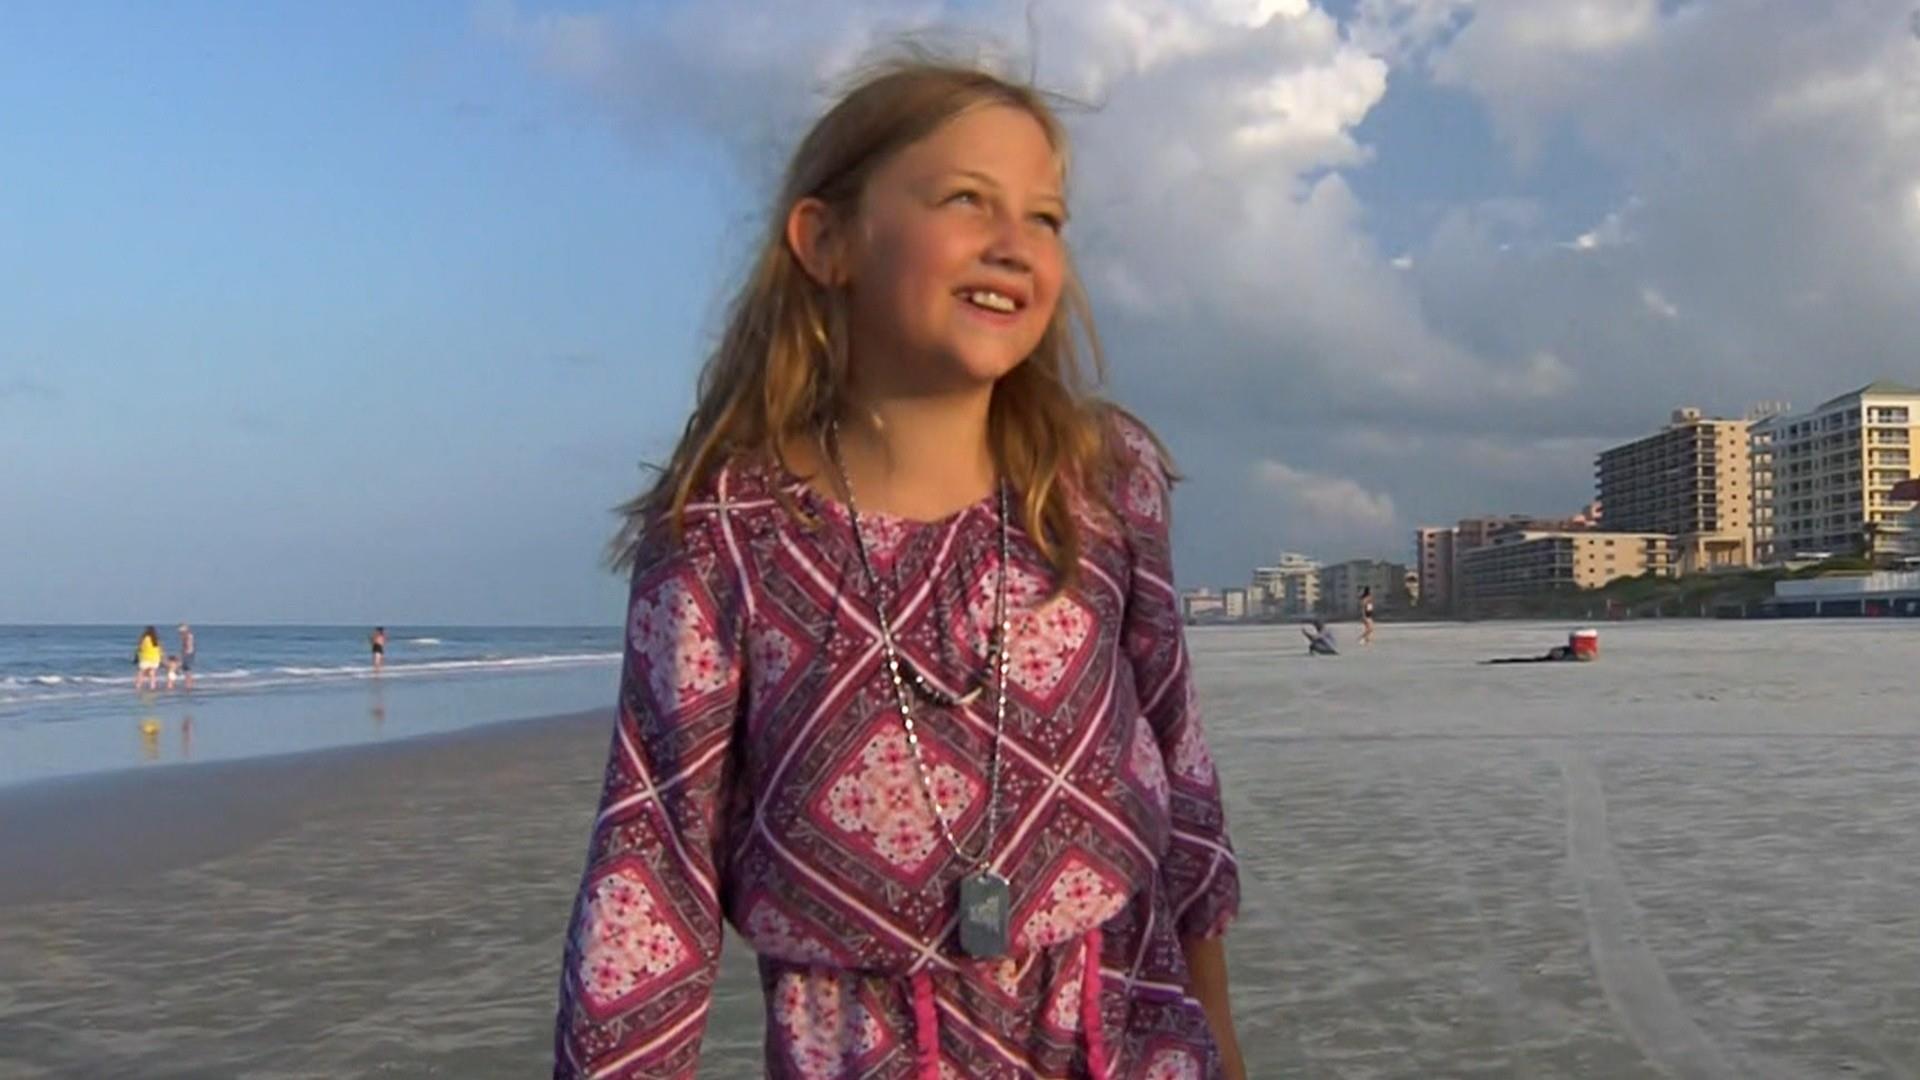 9 Year Old Girl Bitten By Shark In Florida Says She S Not Afraid To Get Back In Water